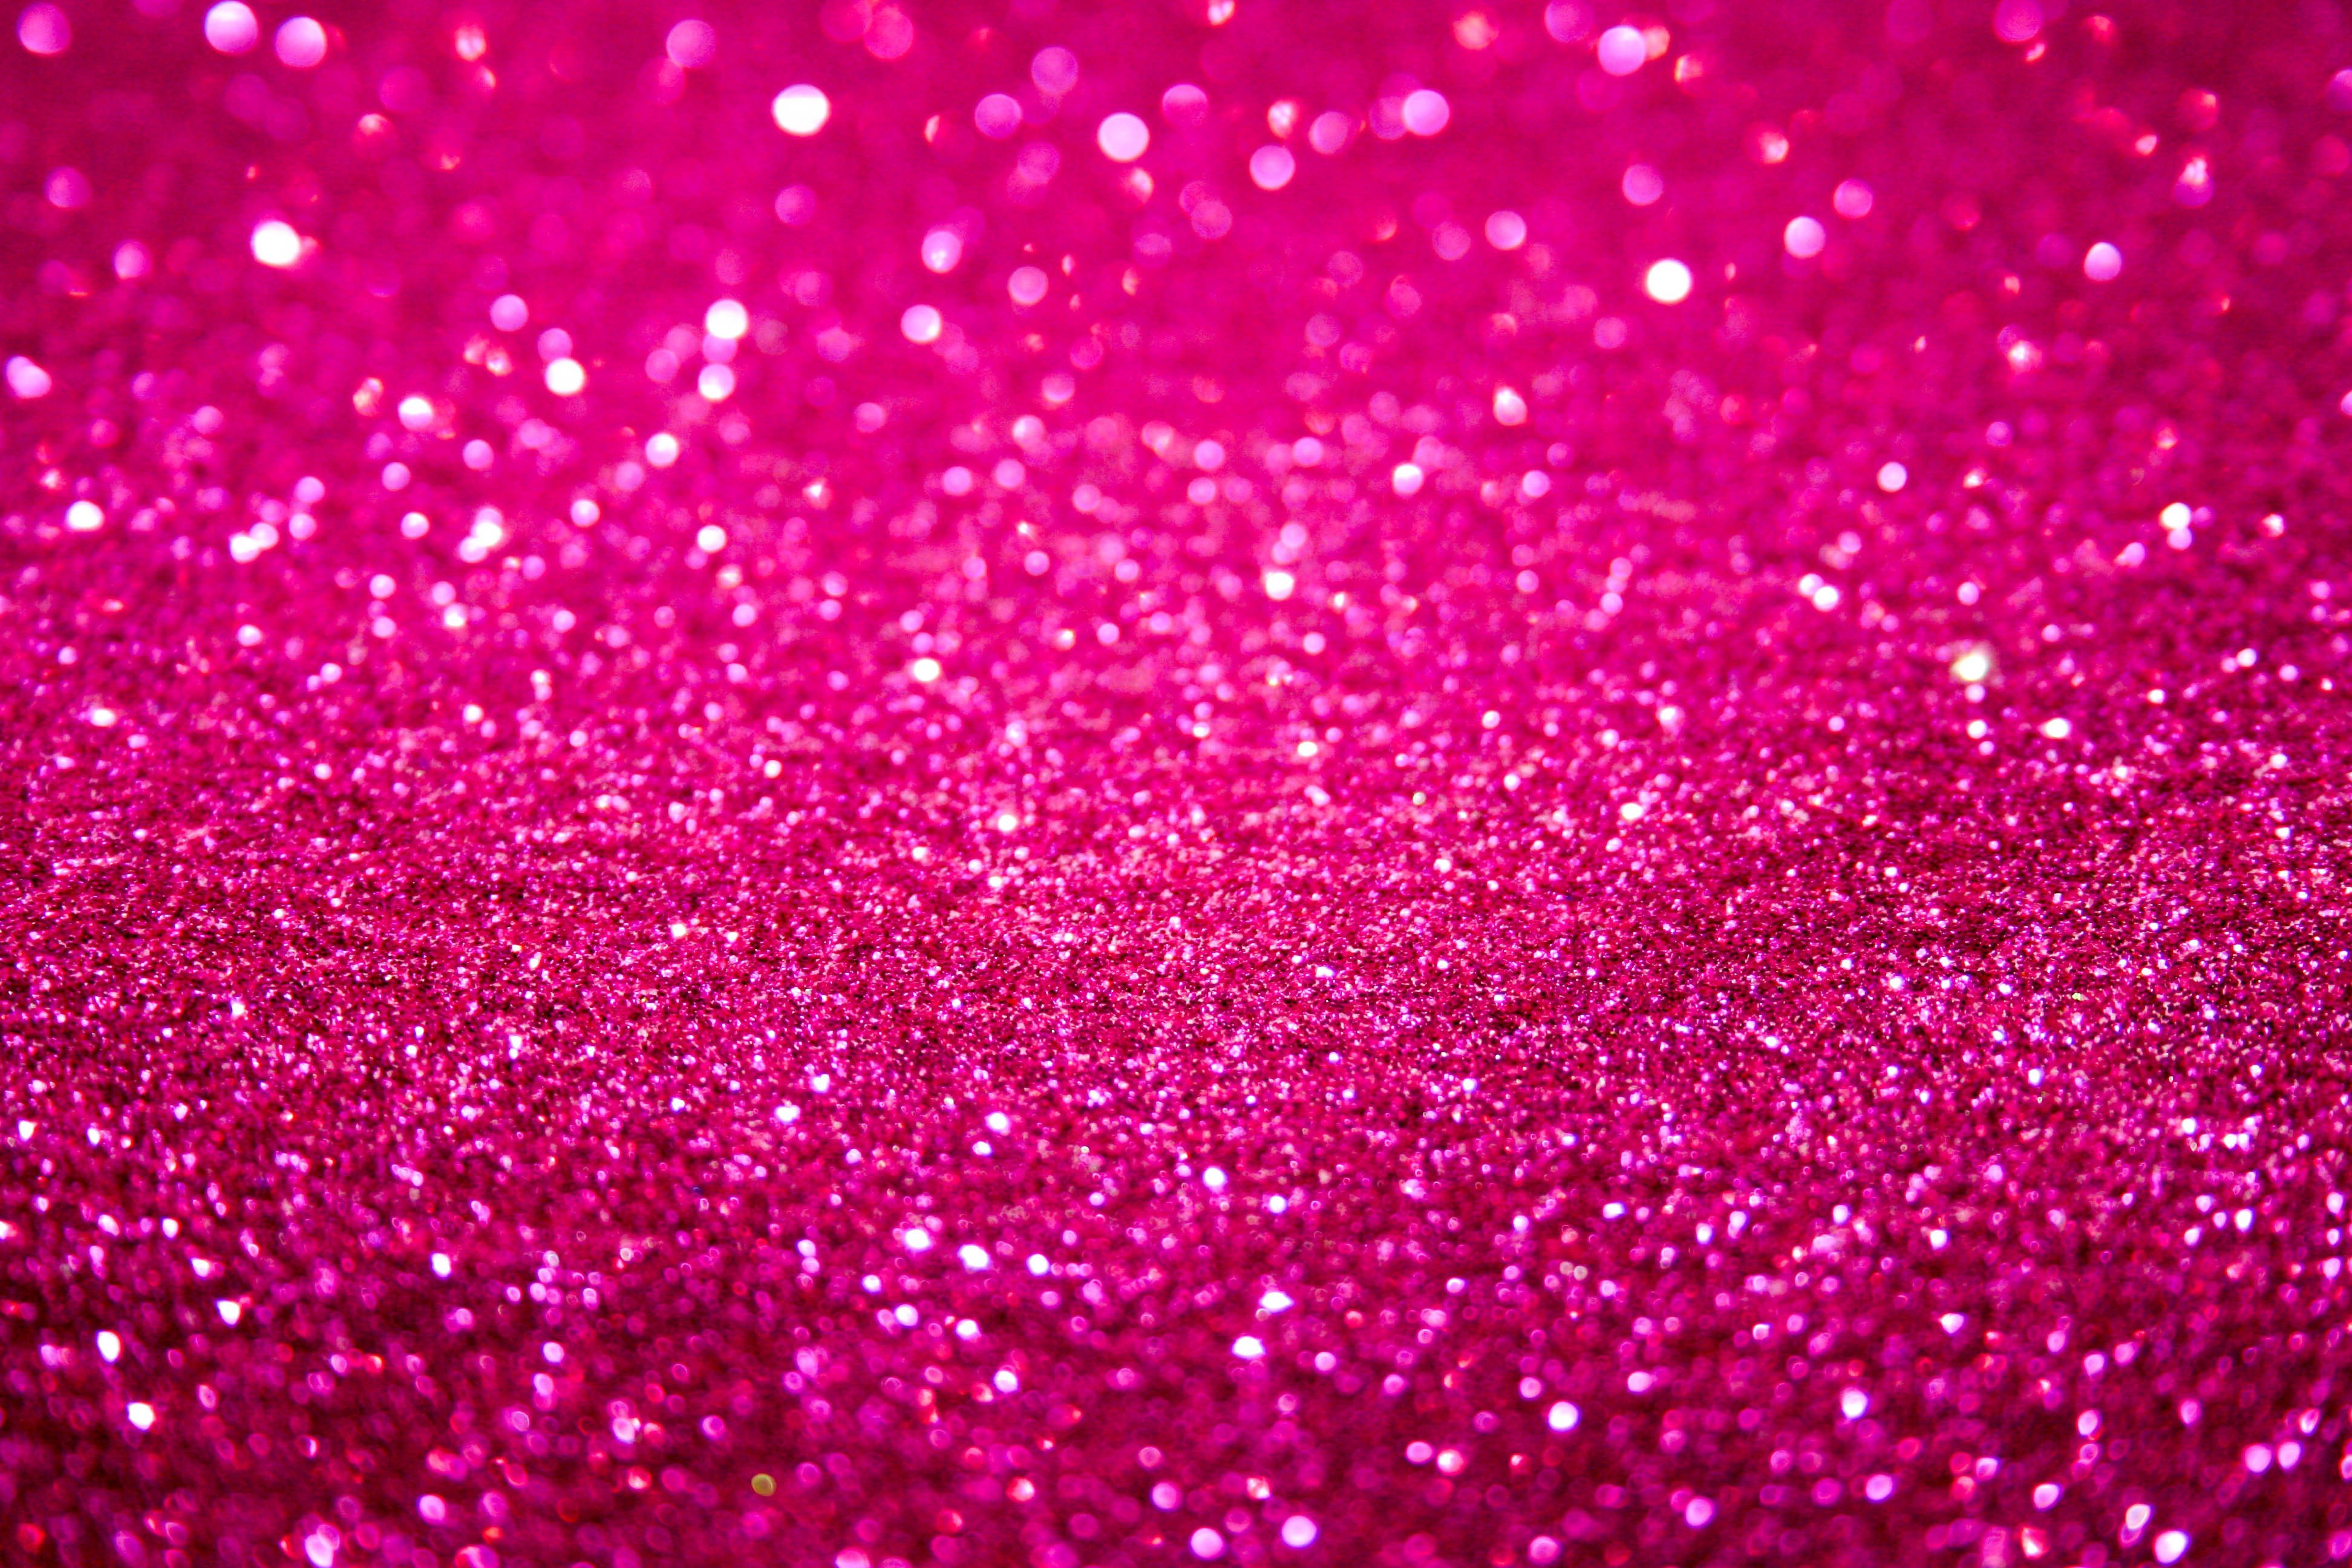 Pink Glitter Wallpapers Pictures 19201440 Cute Glitter Wallpapers 20 Images